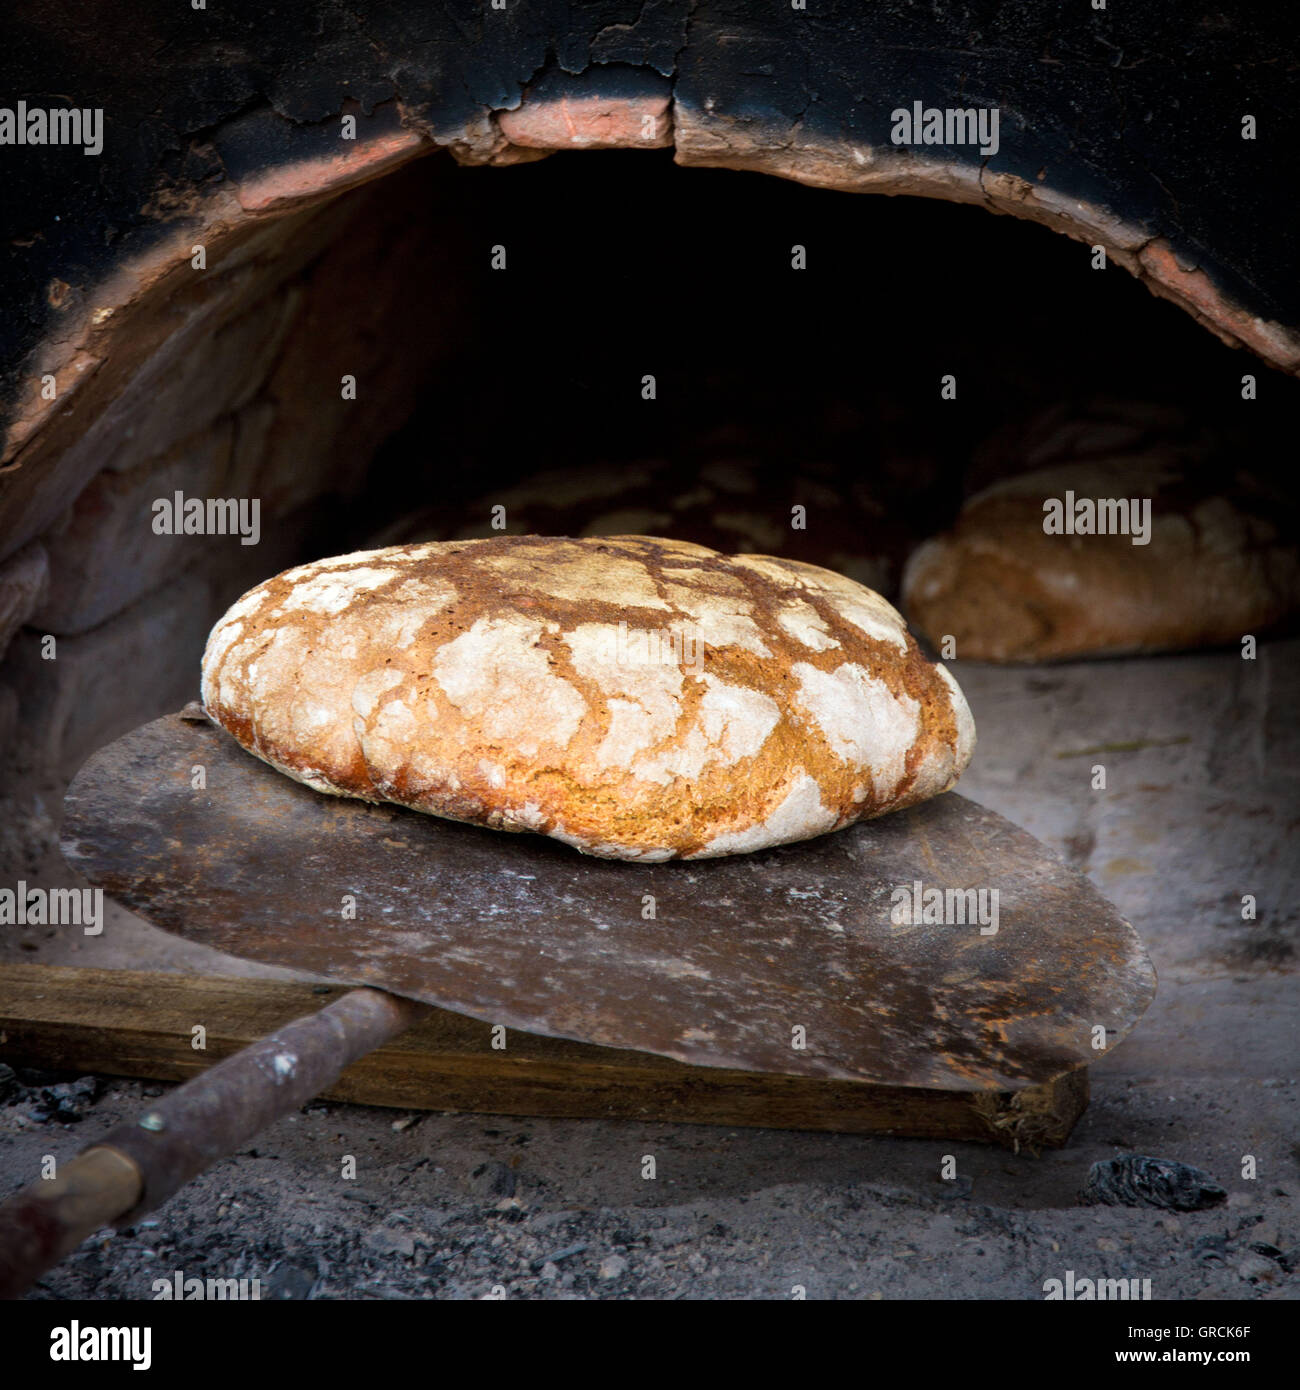 Freshly Baked Bread From The Wood Stove Stock Photo